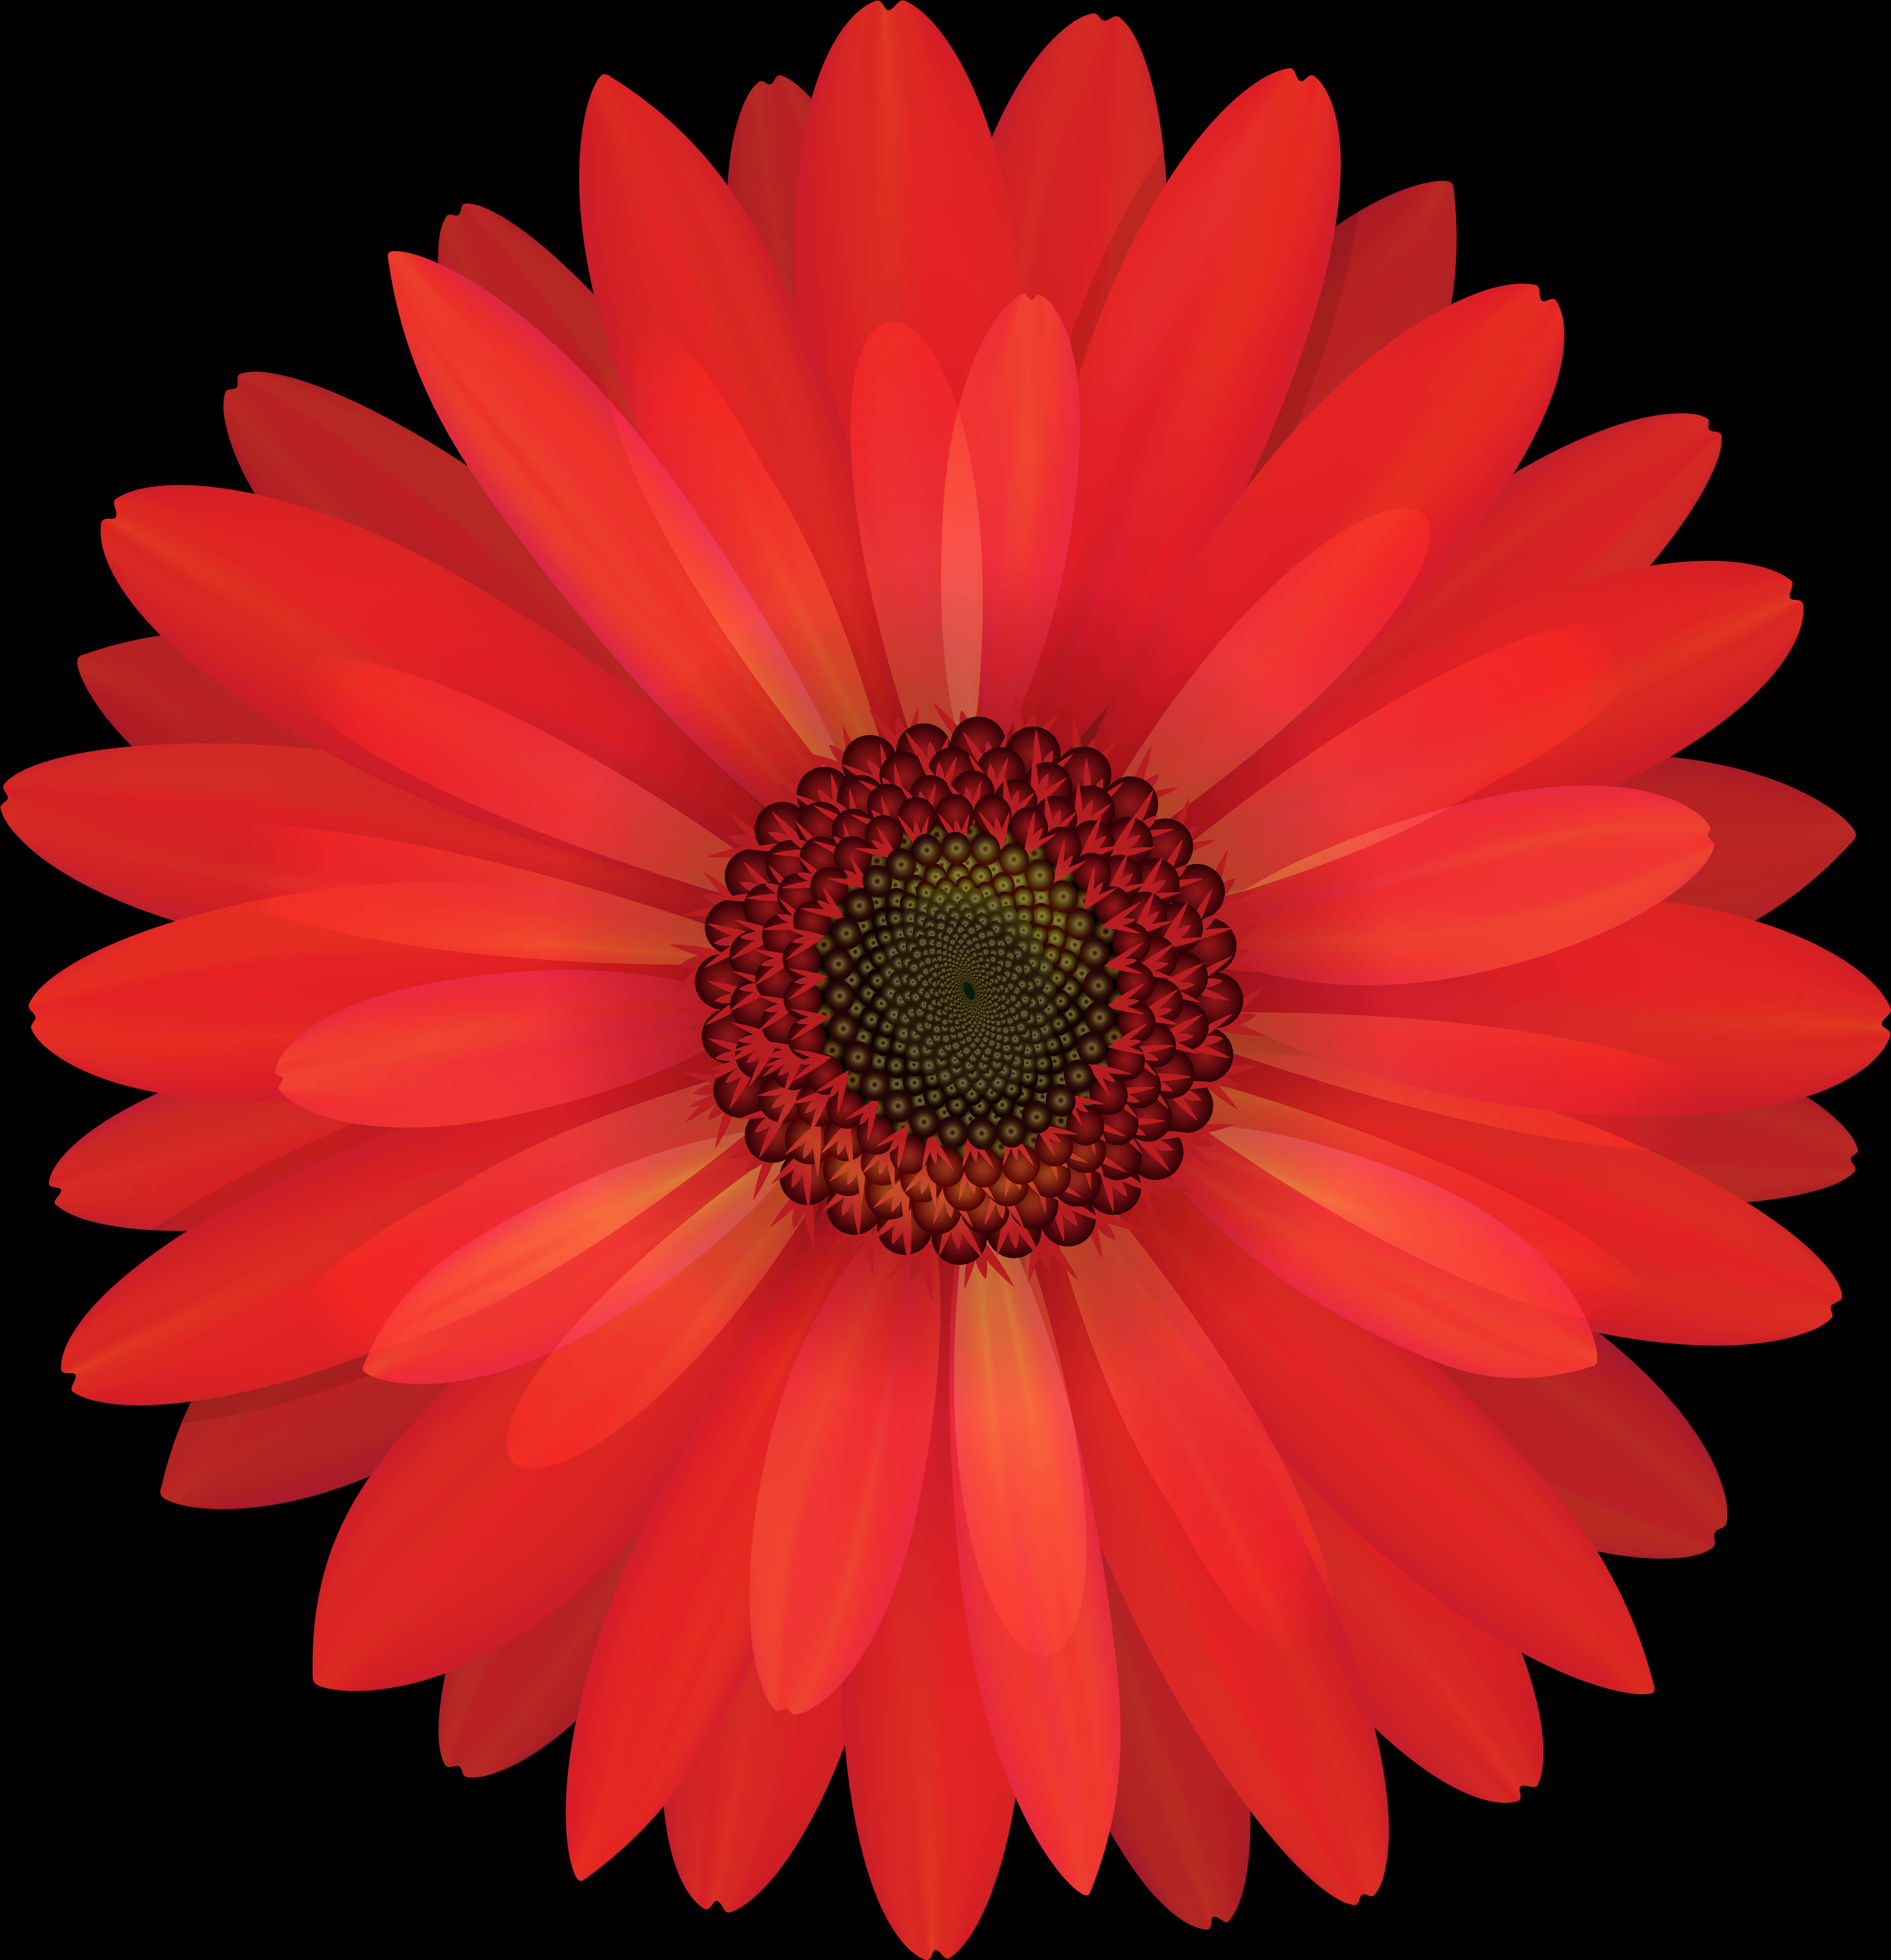 Vibrant Red Daisy Black Background PNG